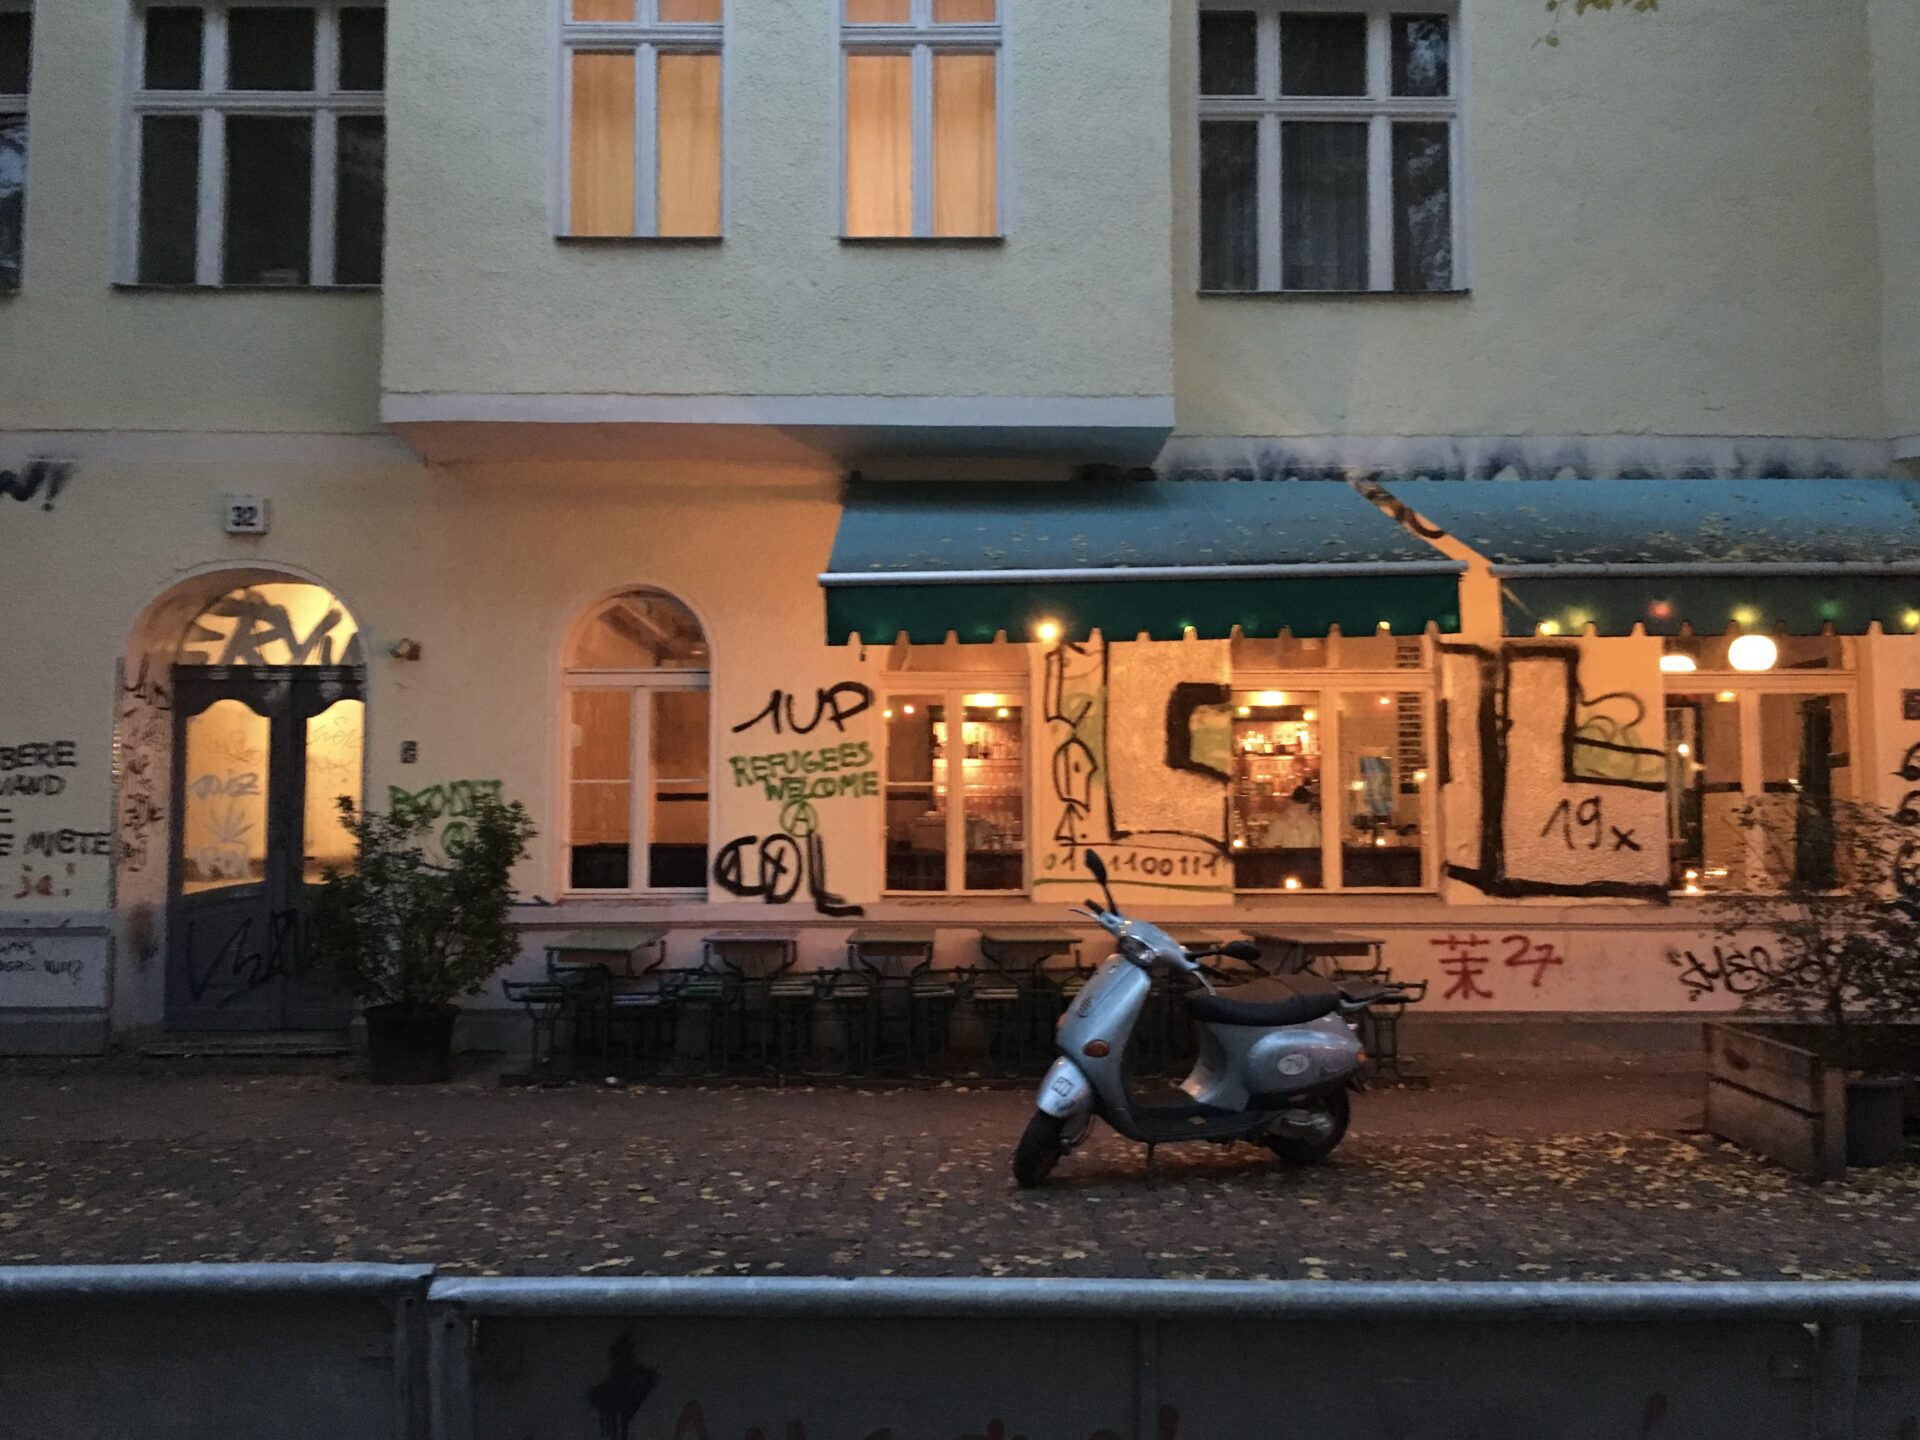 A moped is parked in front of a cafe in Berlin with the words "Refugees Welcome" written in grafiti